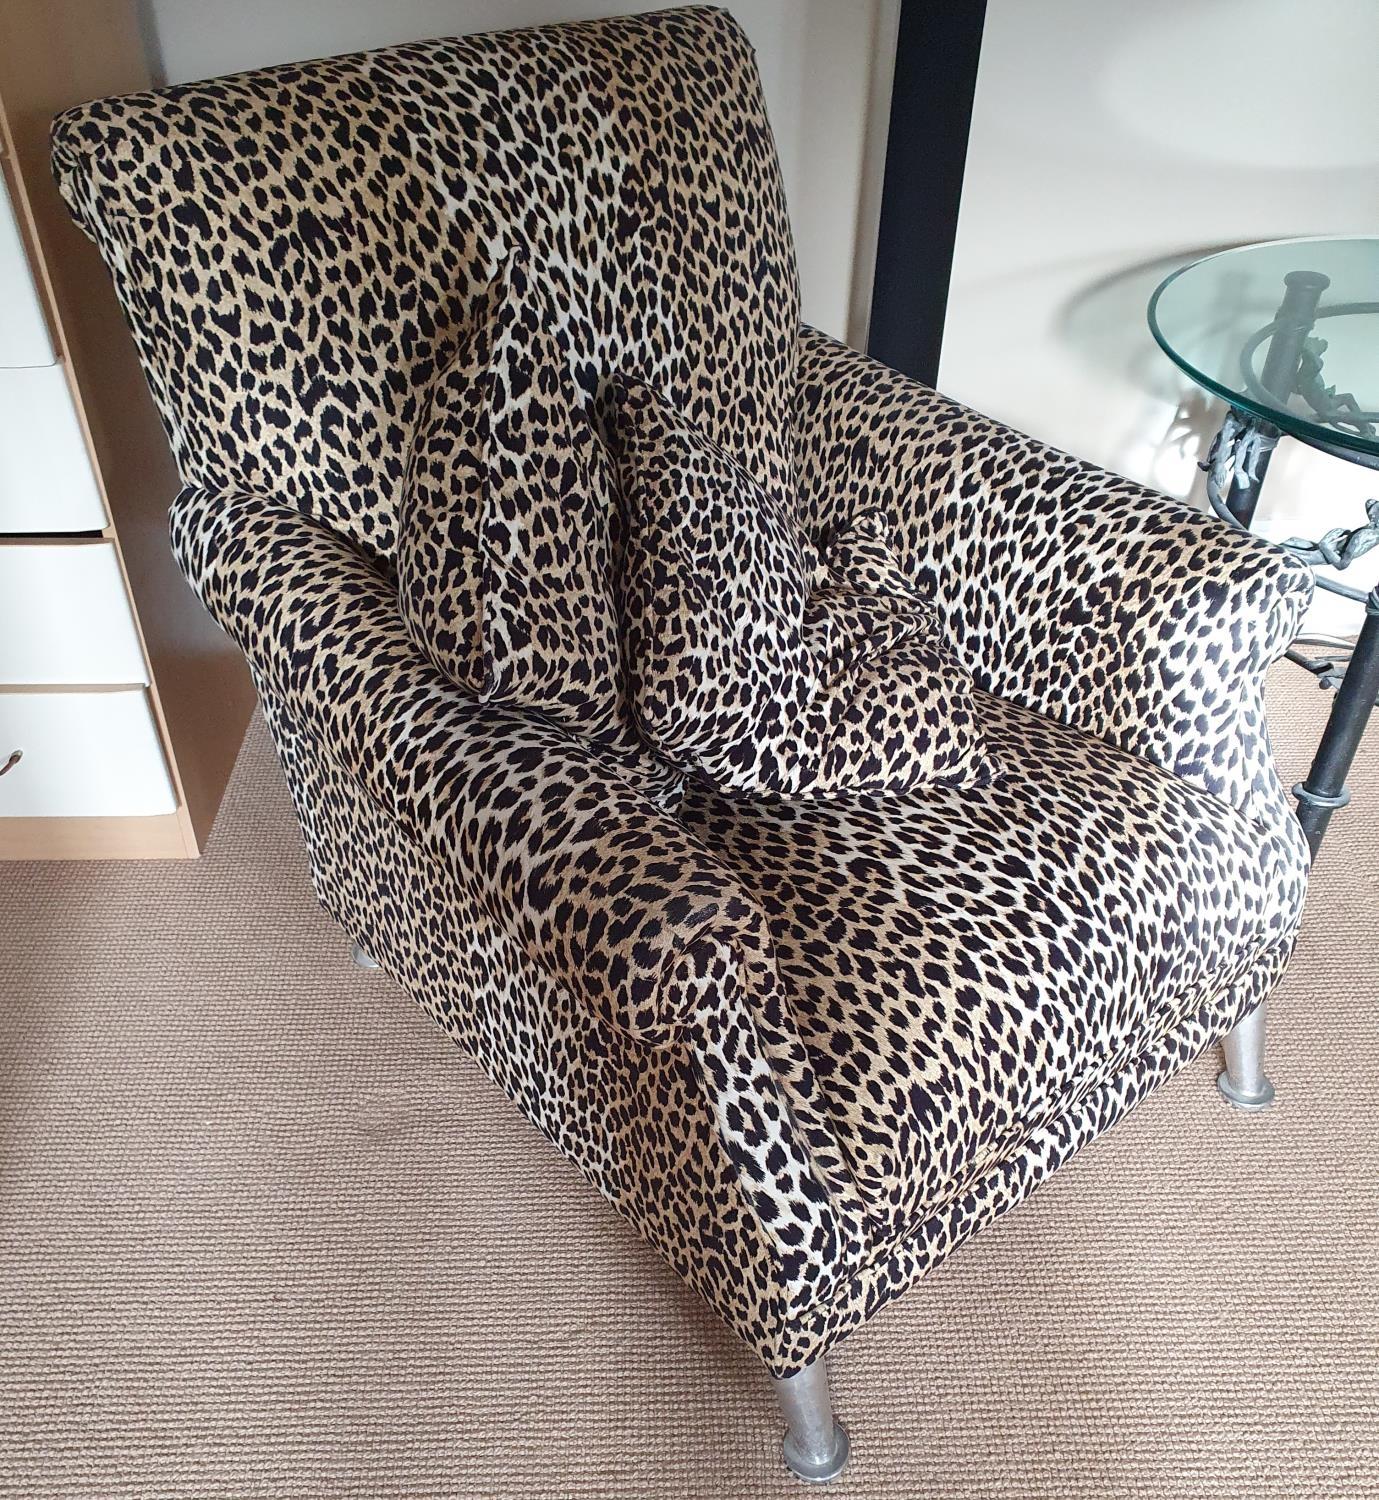 A good pair of Retro style Arm Chairs with Leopard skin style fabric.